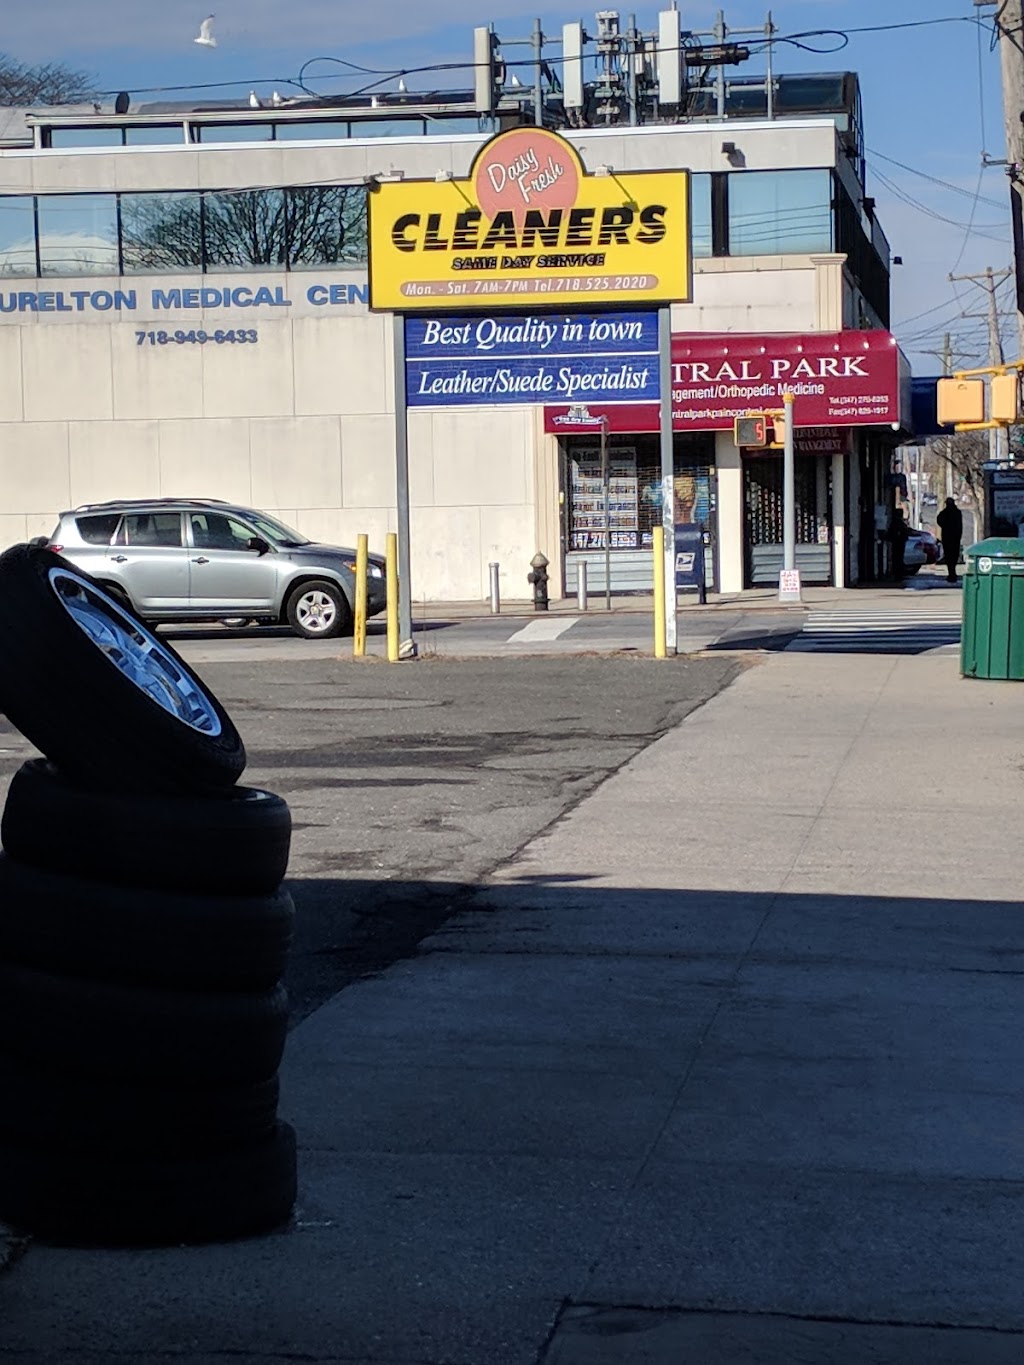 Daisy Fresh Drive-In Dry Cleaners | 225-00 Merrick Blvd, Queens, NY 11413 | Phone: (718) 525-2020